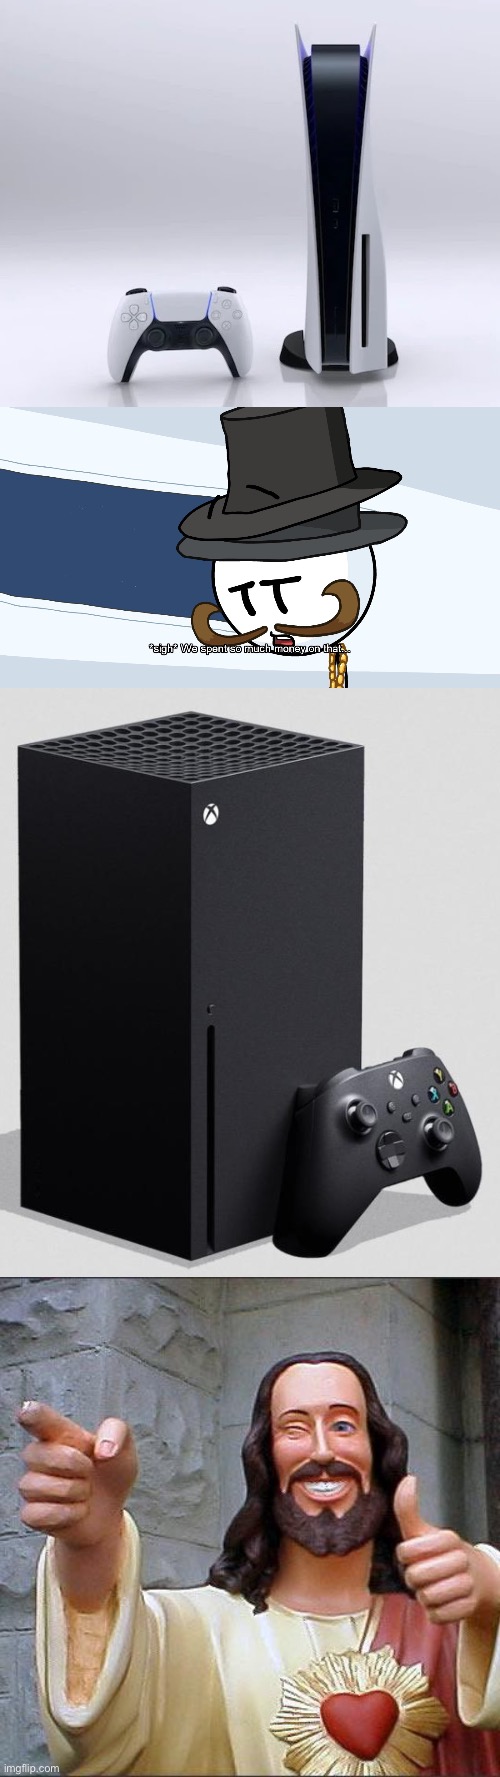 PS5 vs Xbox series X | image tagged in ps5,we spent much money on that,xbox series x,memes,buddy christ | made w/ Imgflip meme maker